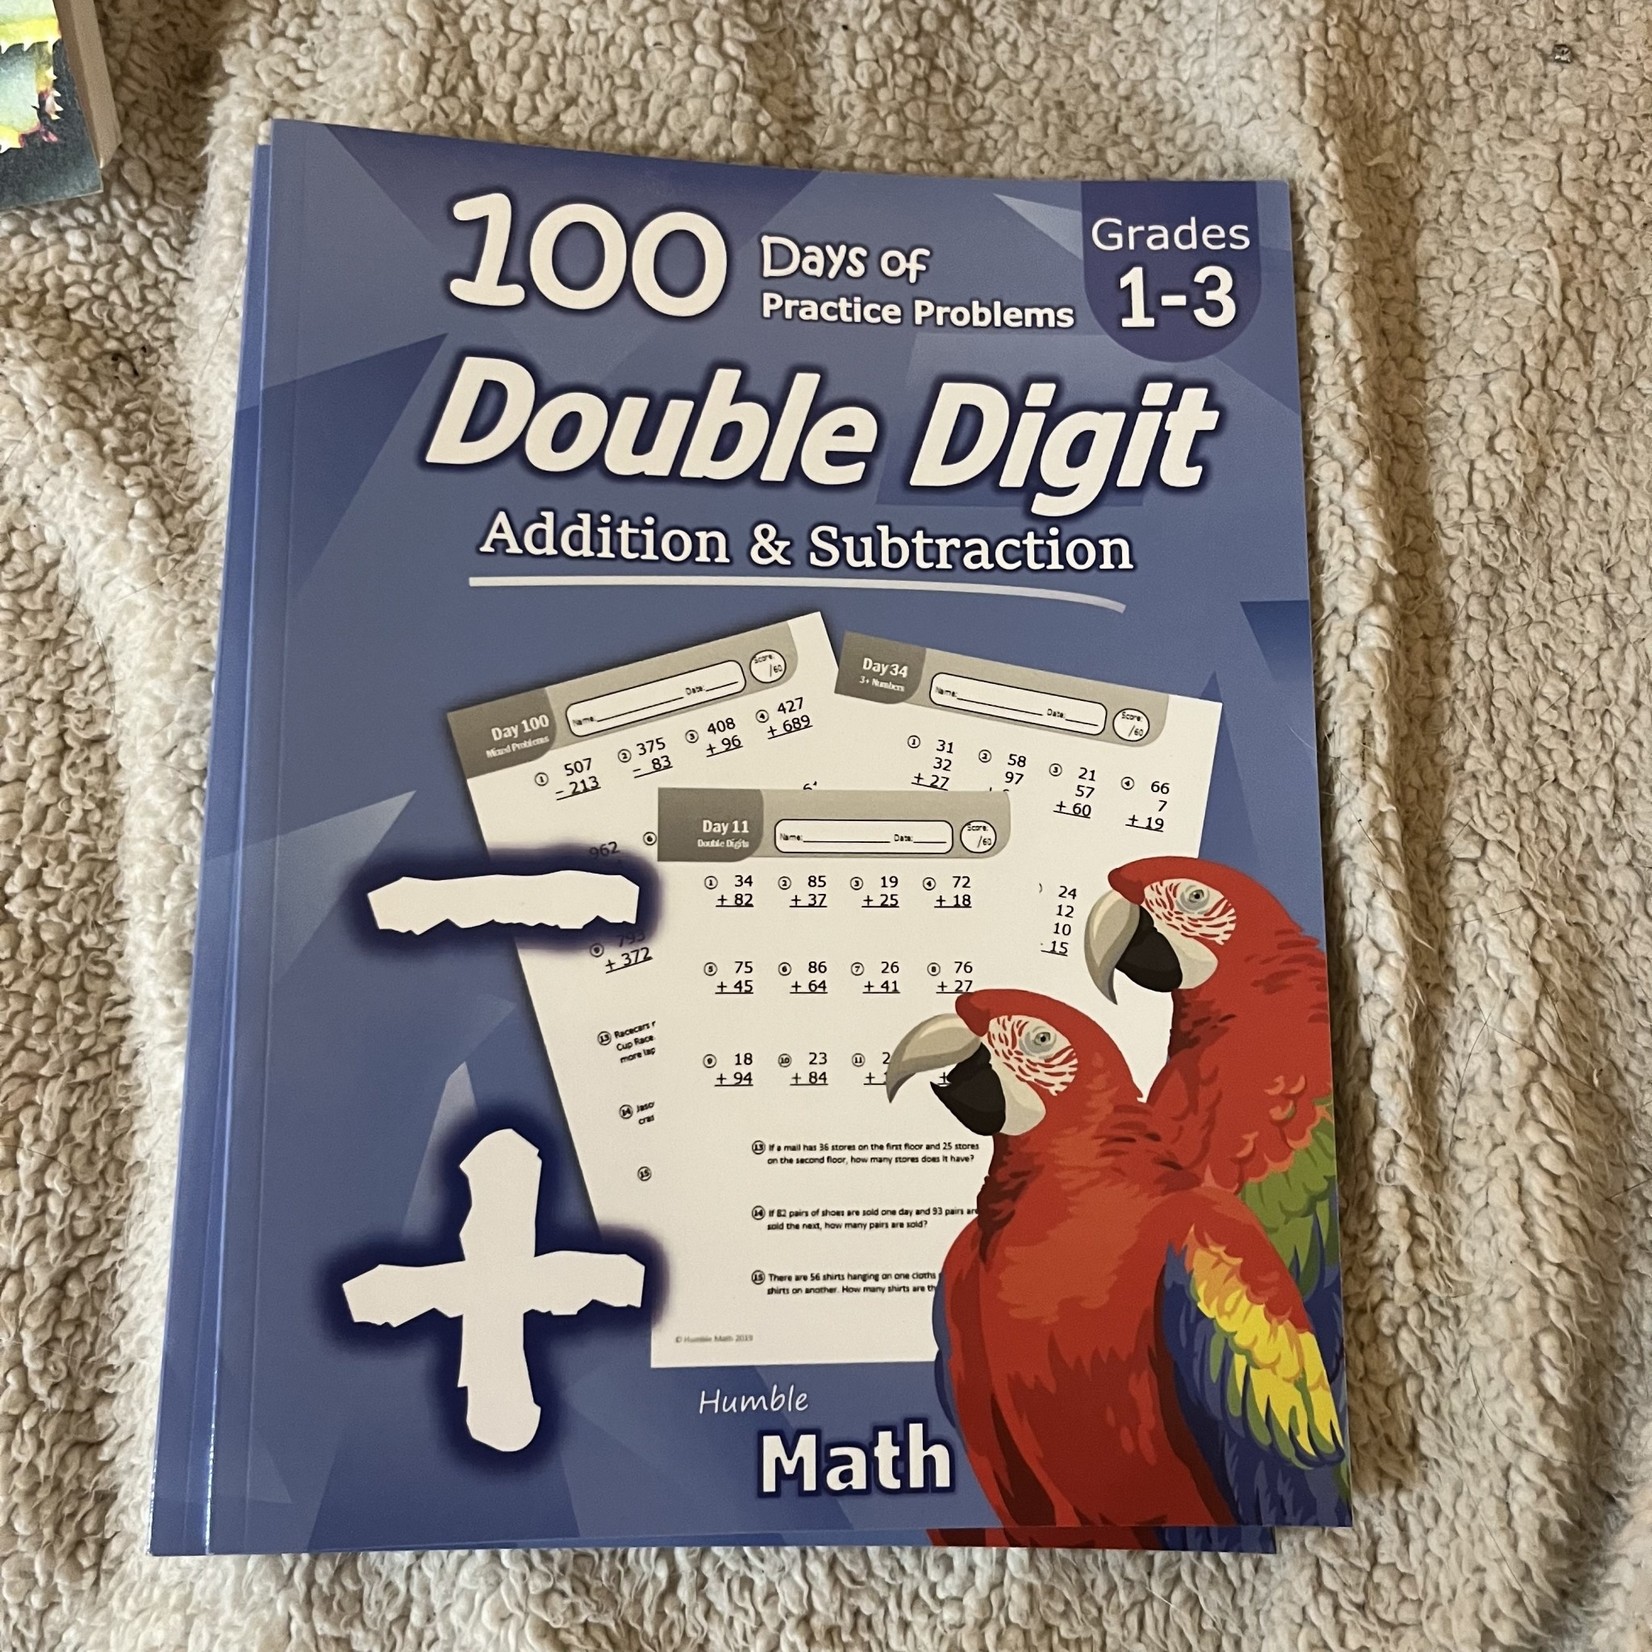 100 Days of Practice Problems - Double Digit, Addition & Subtraction, Grades 1-3